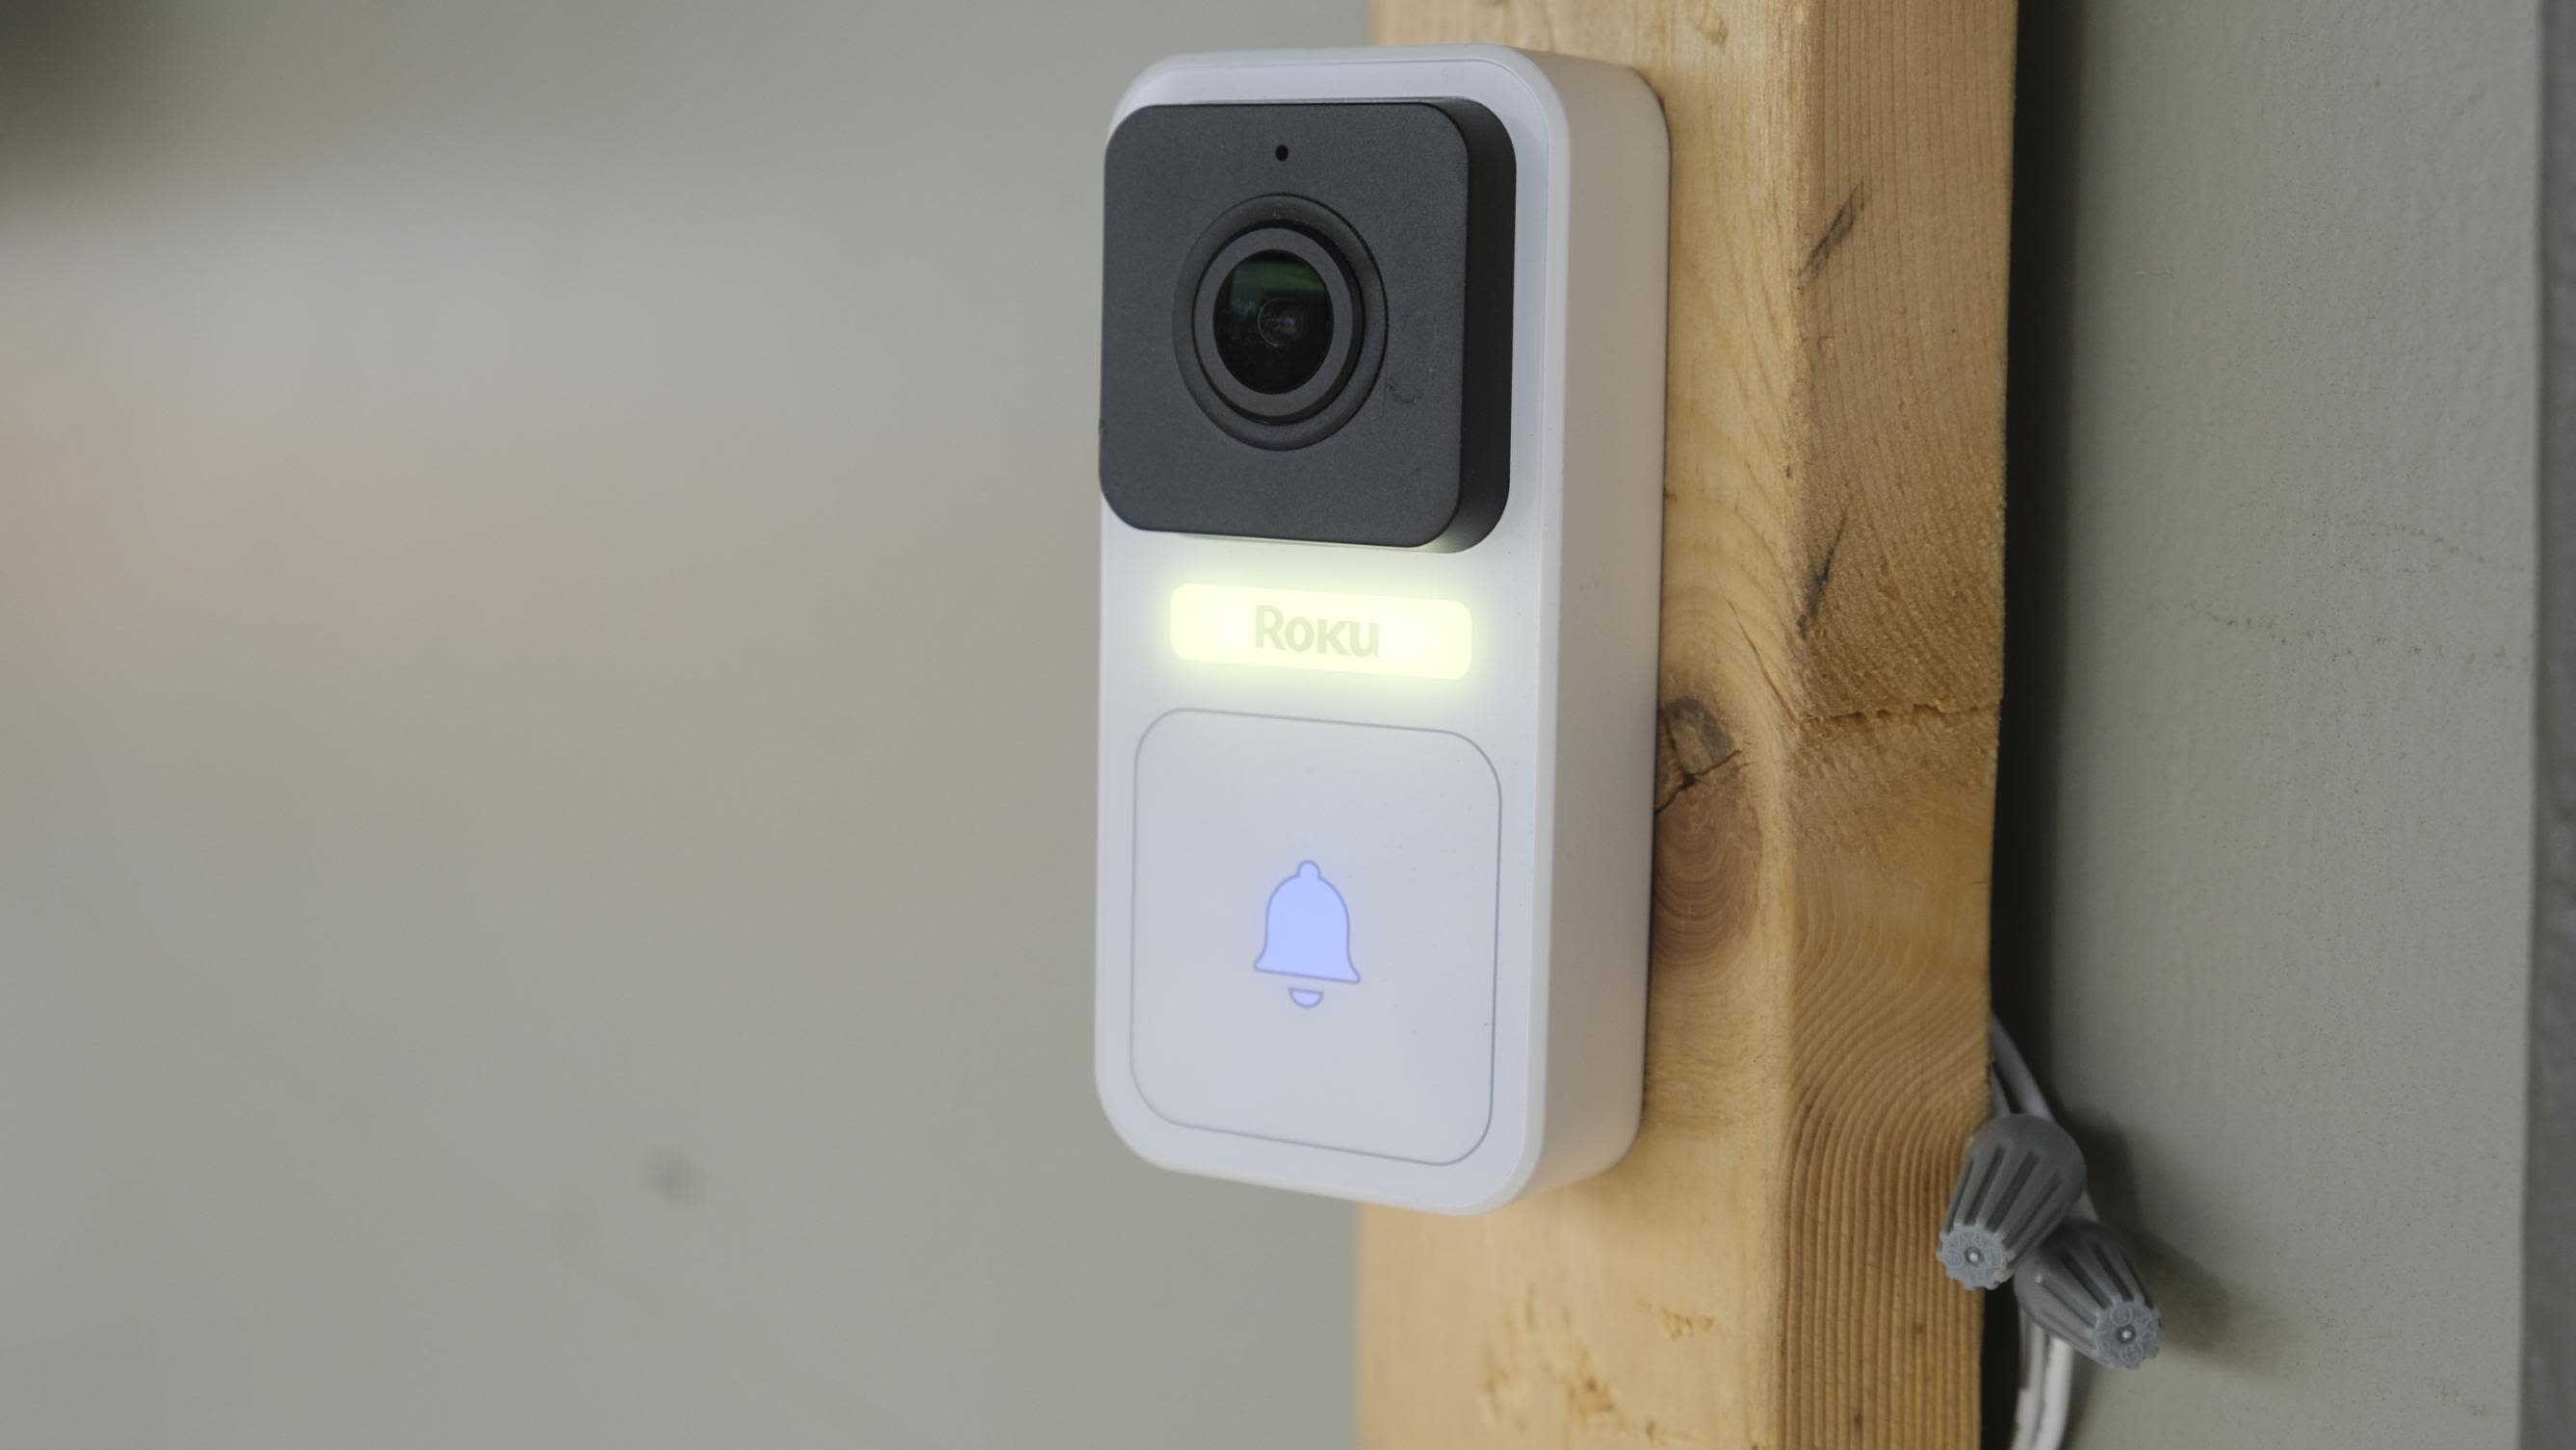 4 Free Ways to Save Ring Doorbell Video with No Subscription